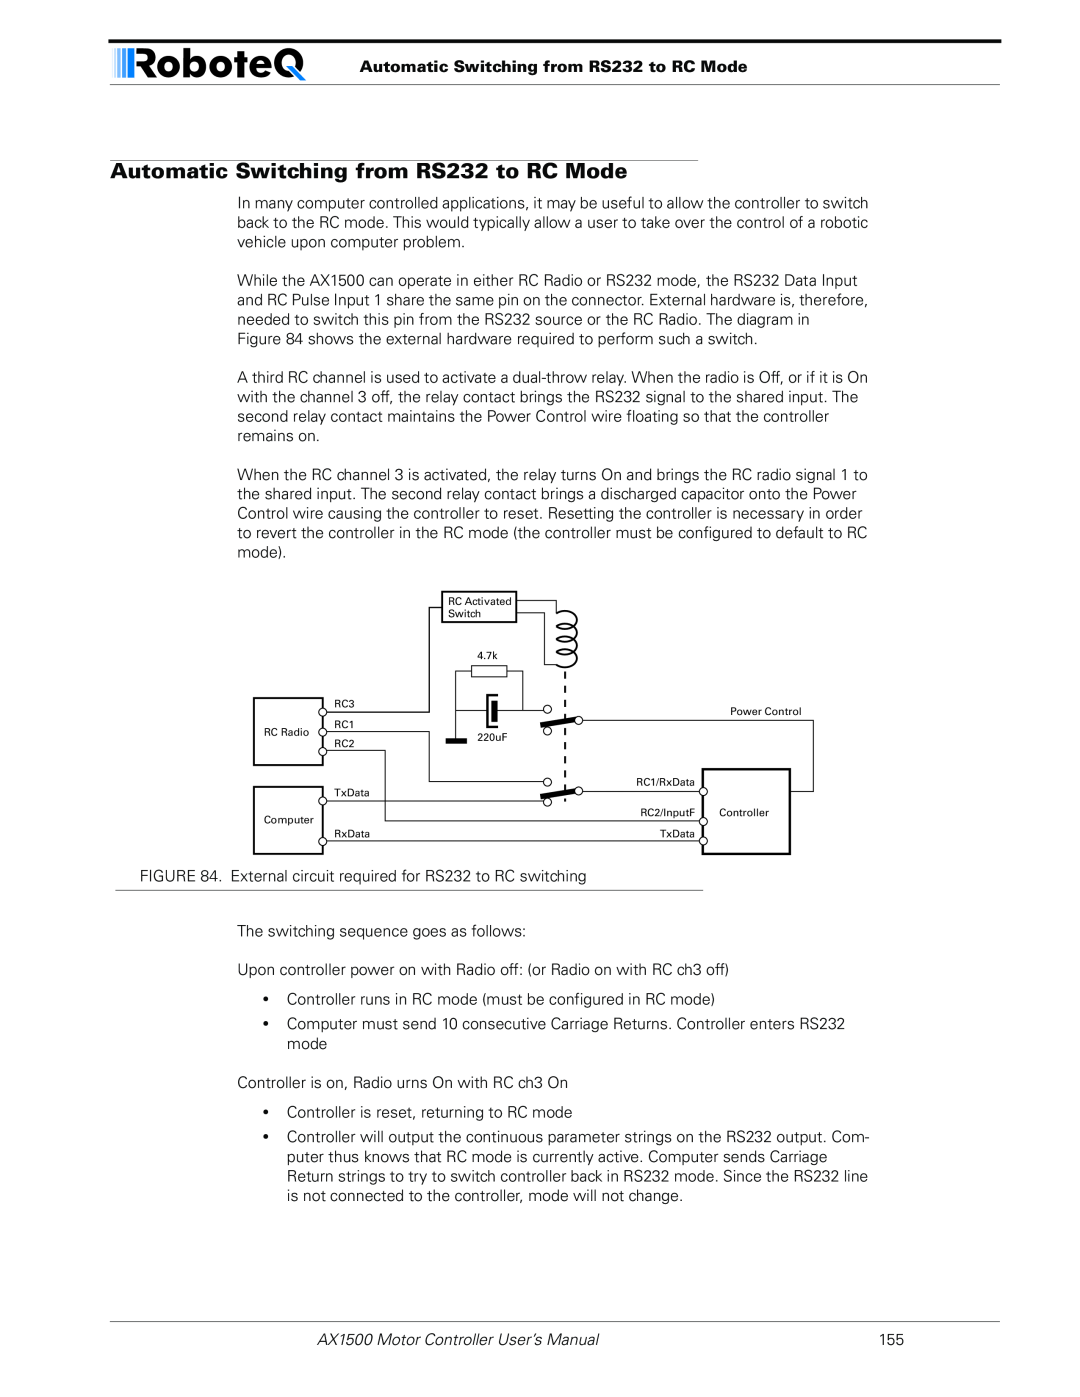 RoboteQ AX2550 user manual Automatic Switching from RS232 to RC Mode, AX1500 Motor Controller User’s Manual 